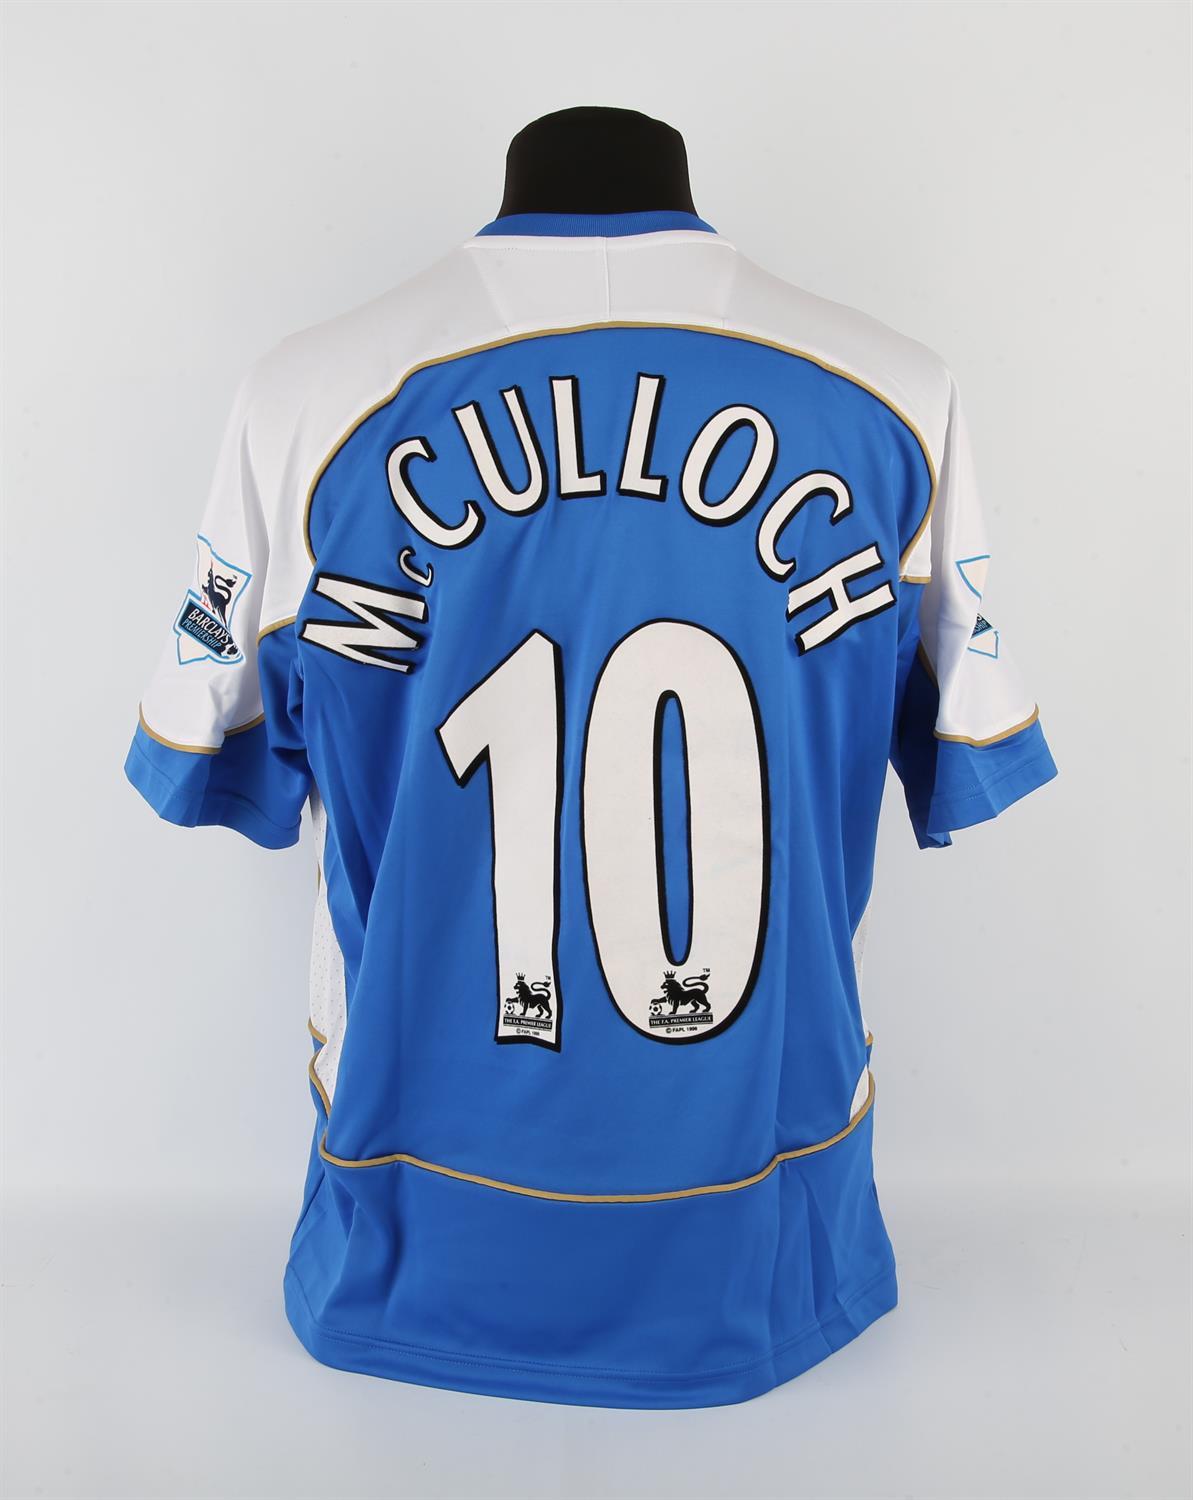 Wigan Athletic Football club, McCulloch (No.10) Season shirt from 2006-2007, S/S.